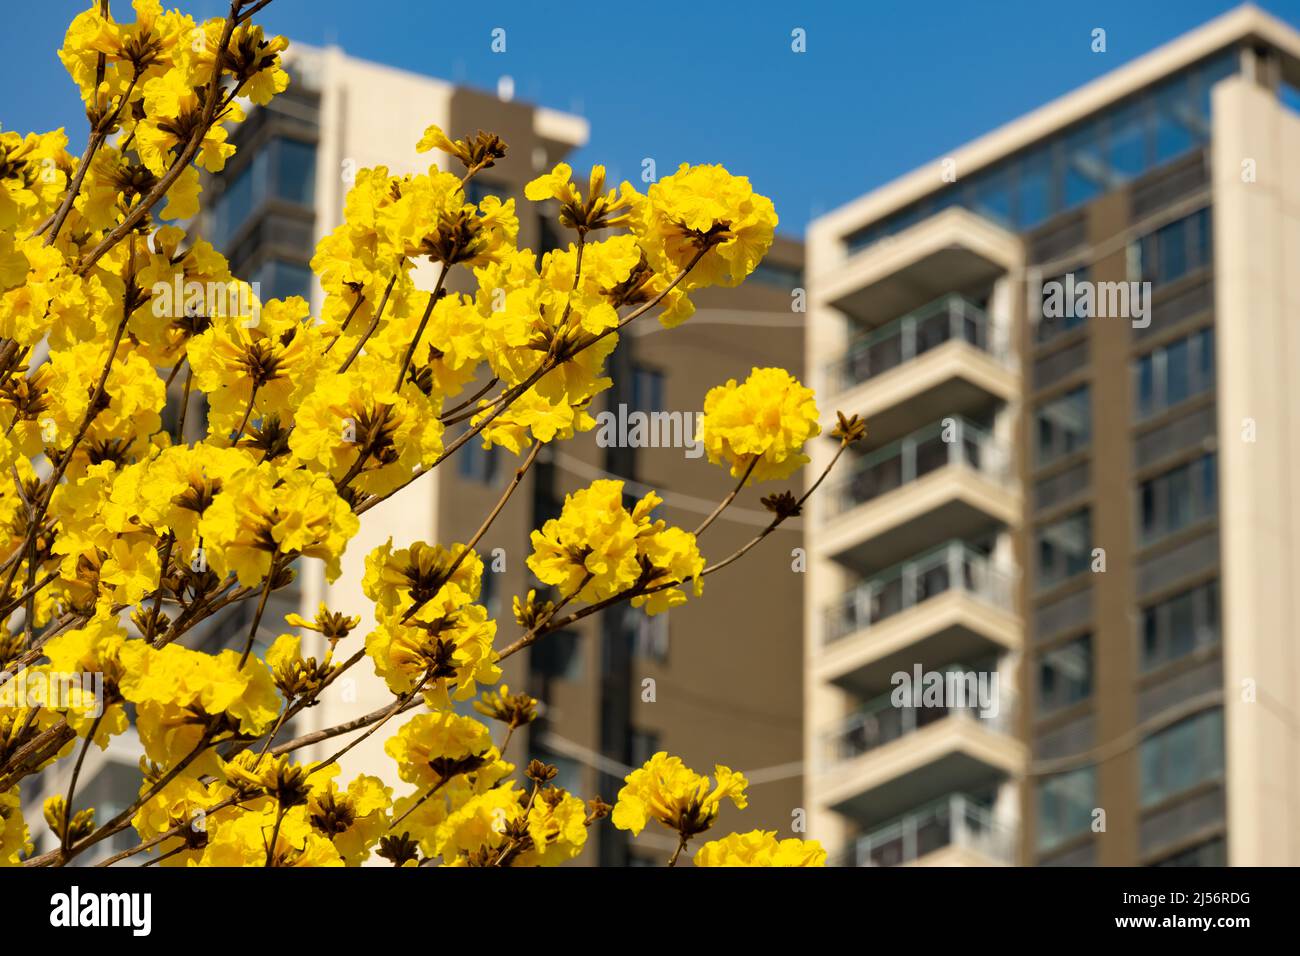 blooming Guayacan or Handroanthus chrysanthus or Golden Bell Tree  in front of a building Stock Photo